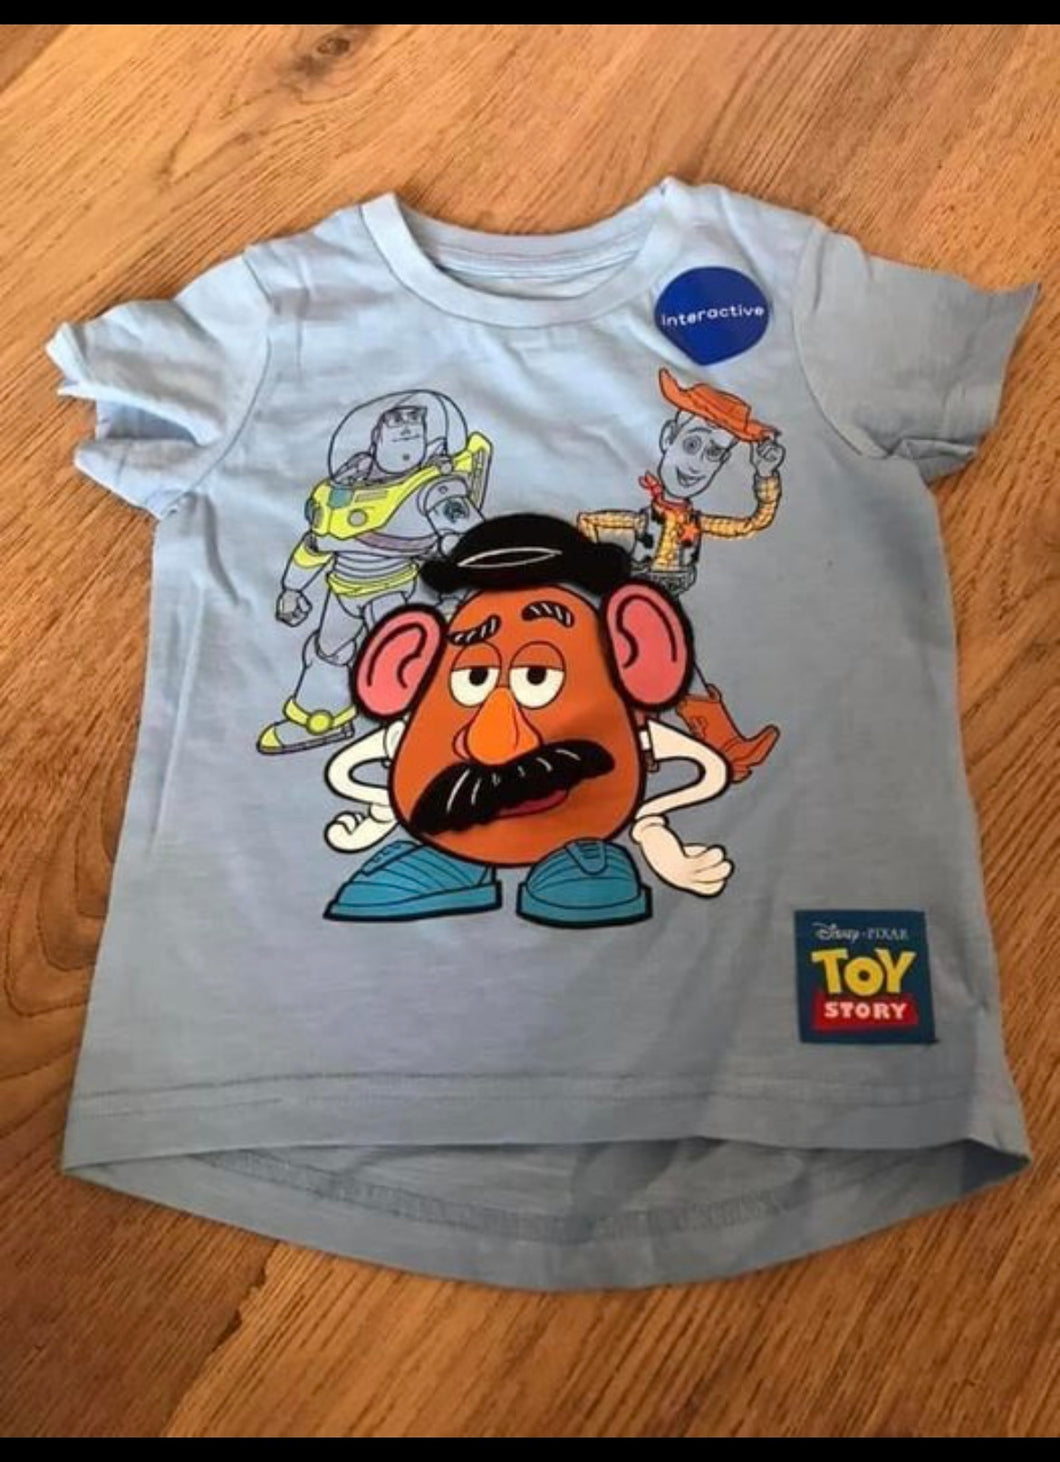 Toy Story t-shirt